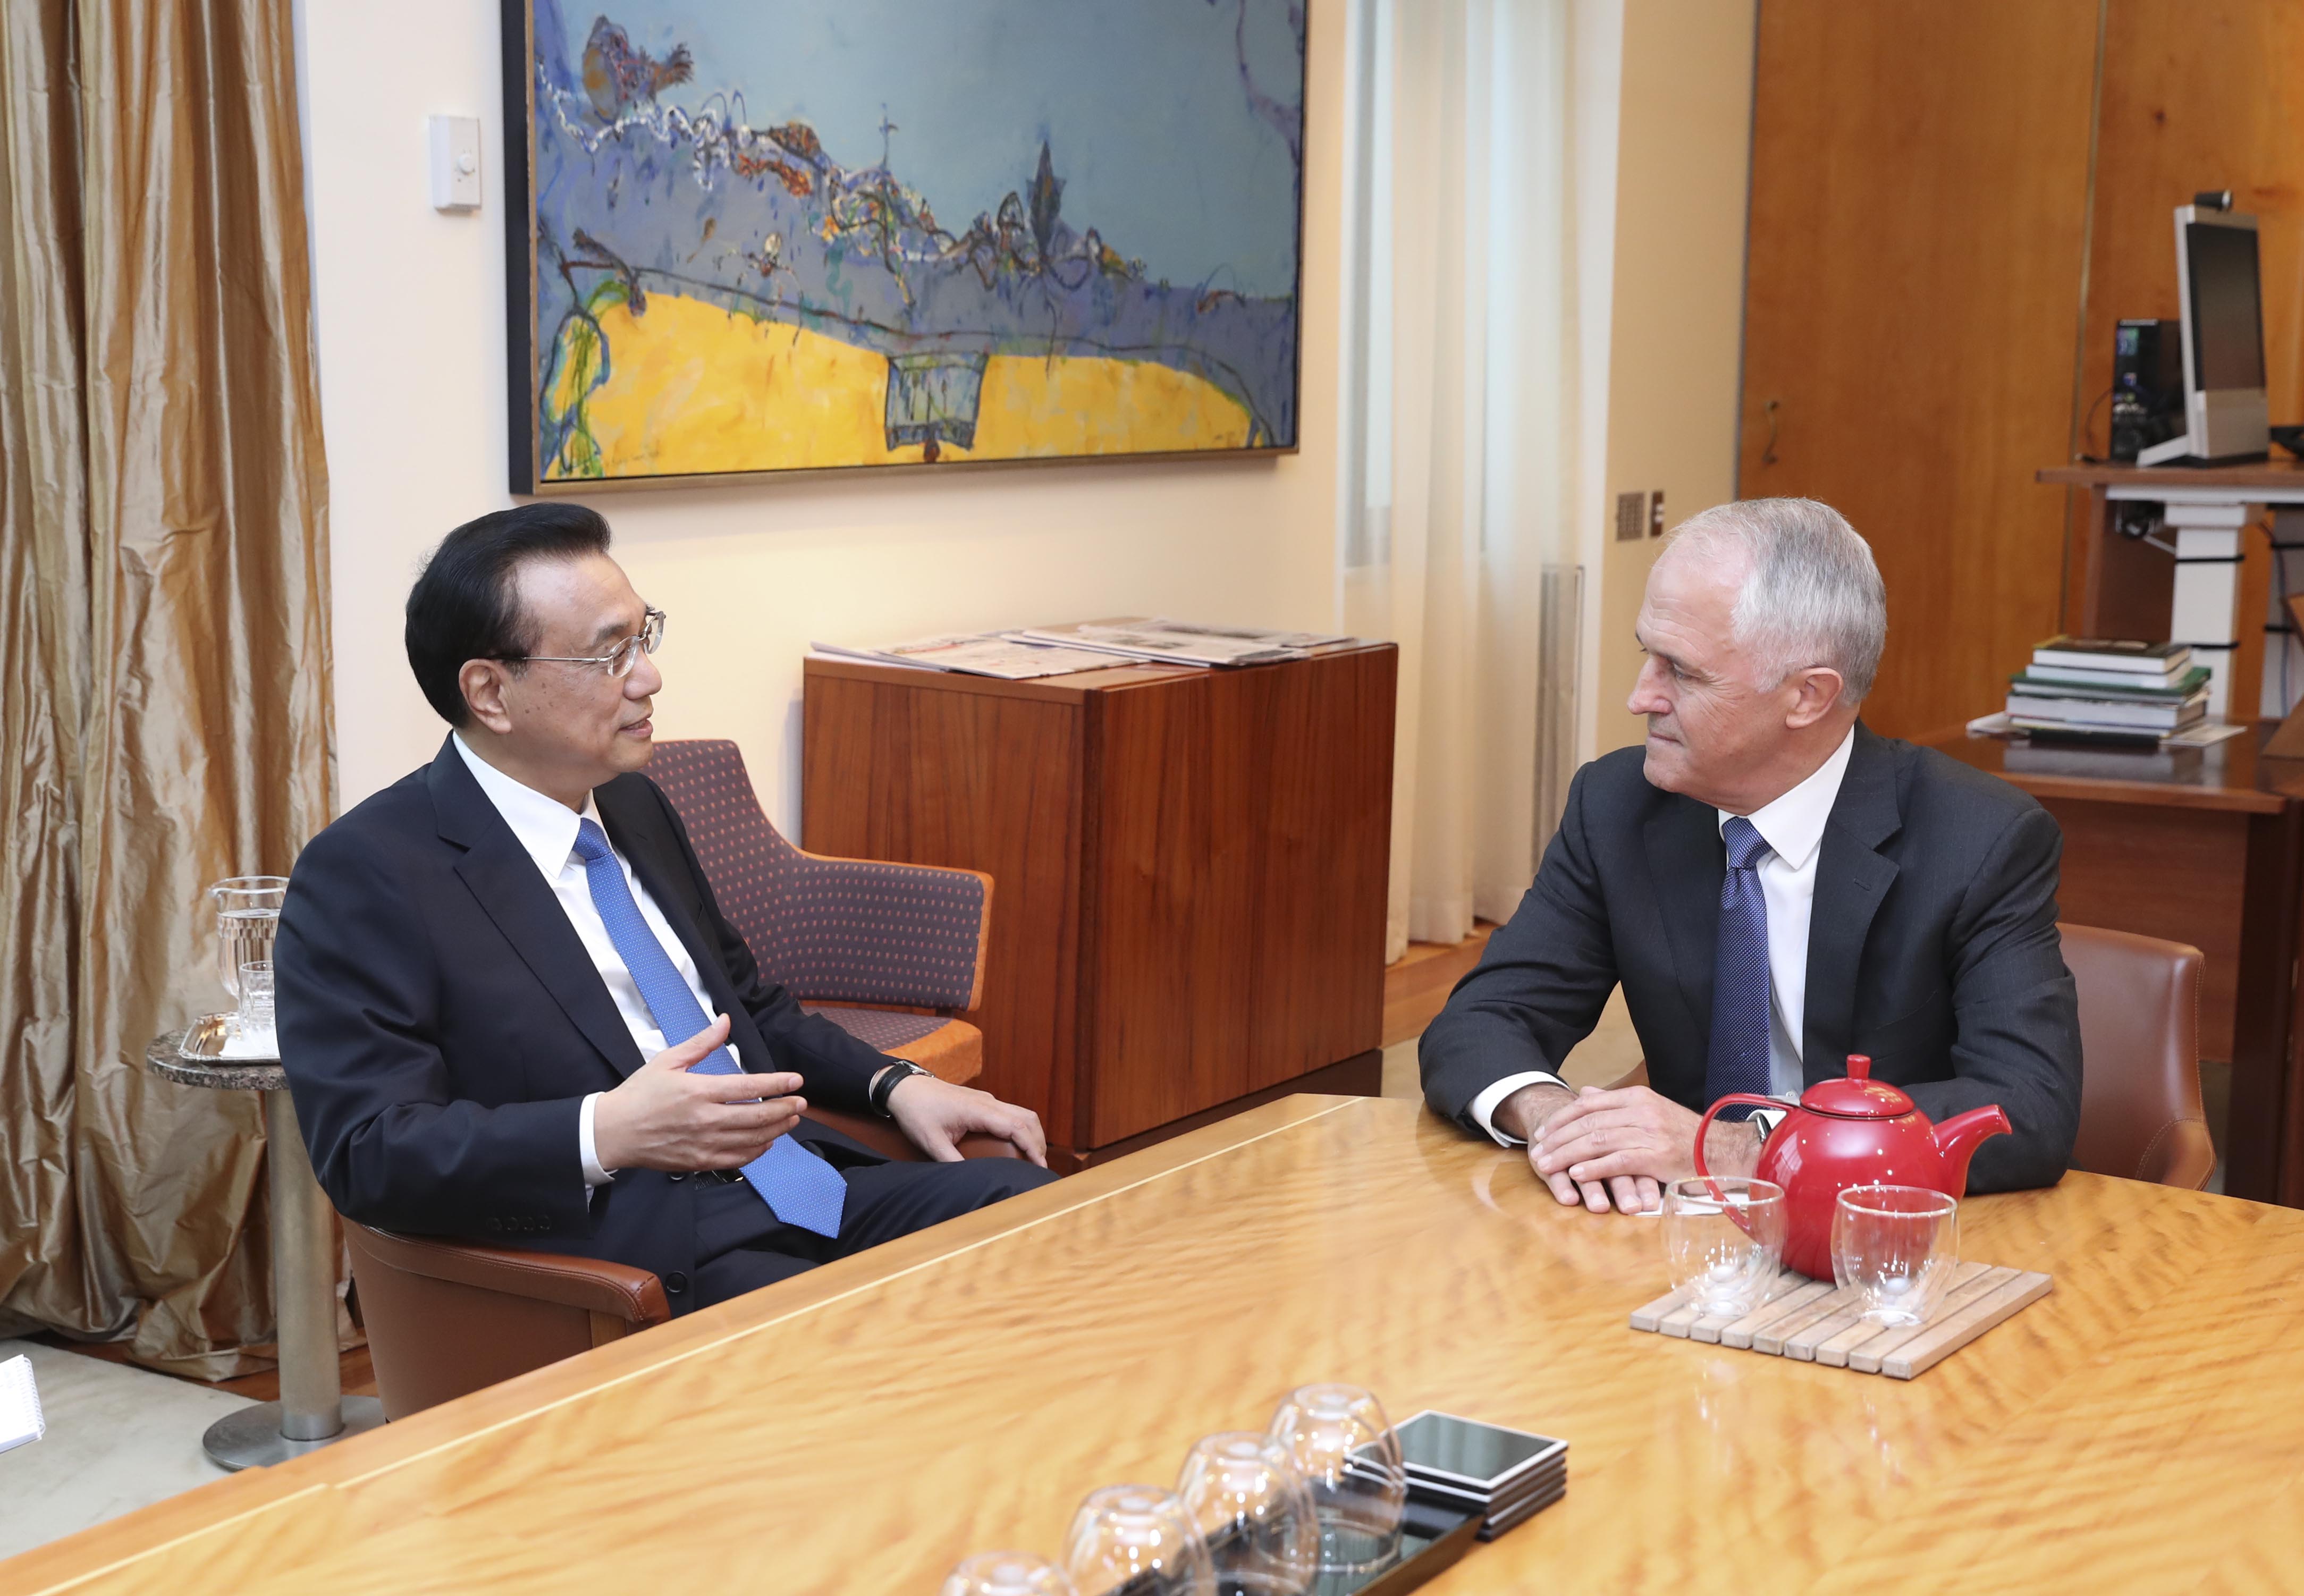 Chinese Premier Li Keqiang meets his Australian counterpart Malcolm Turnbull in Canberra, Australia, on Thursday, March 23, 2017. Li said during the meeting that China will expand the scope of opening-up, and promote trade and investment liberalization and facilitation as well as uphold the current global trading system. [Photo: gov.cn]